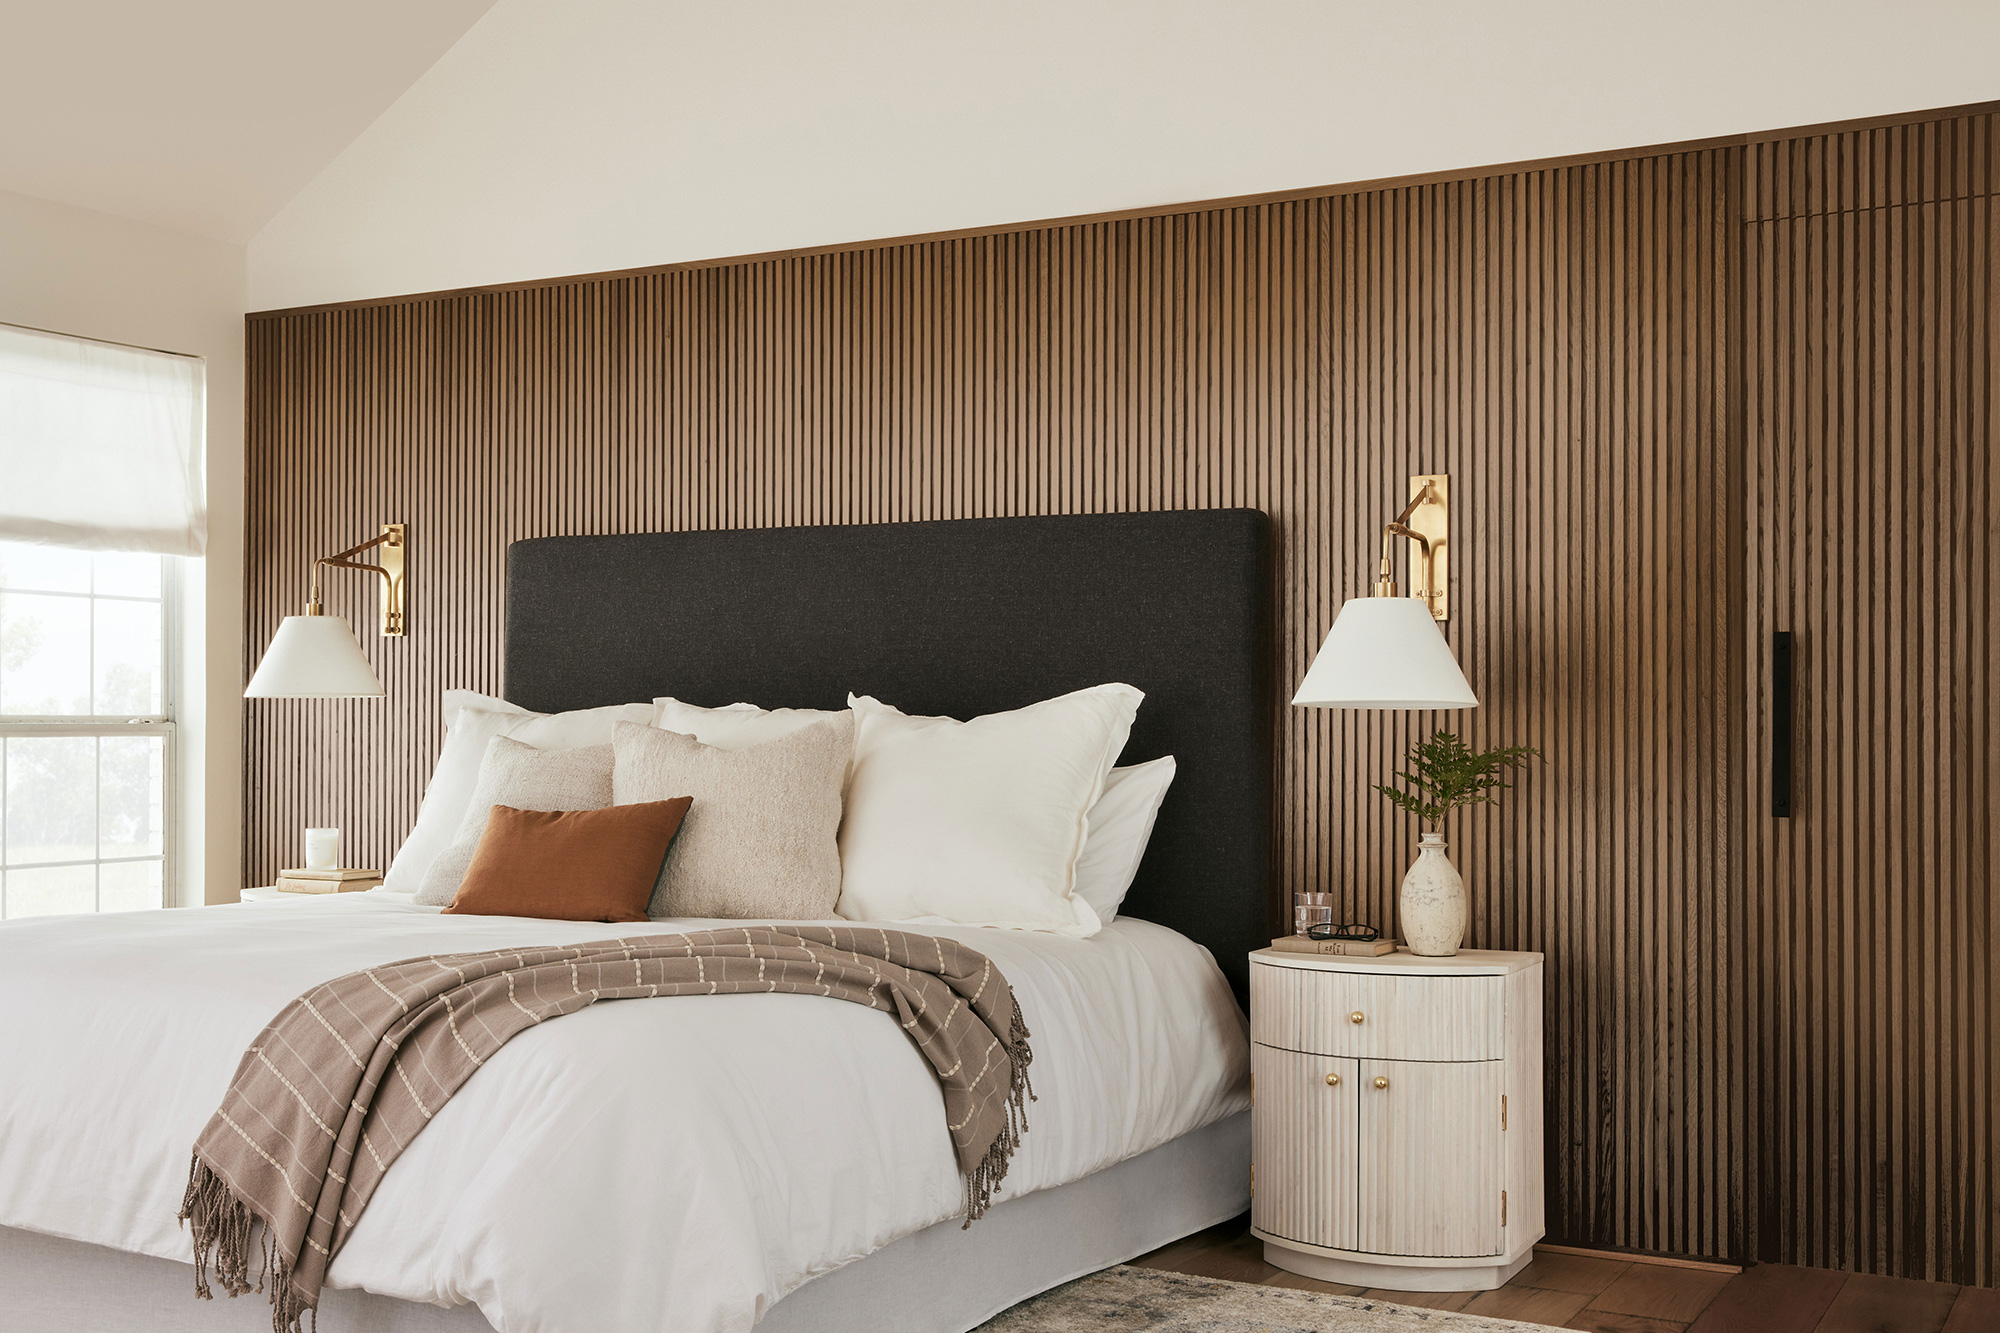 Side Image of primary bedroom with wood stained wall using Magnolia Home by Joanna Gaines® interior stain Woodsy Escape.